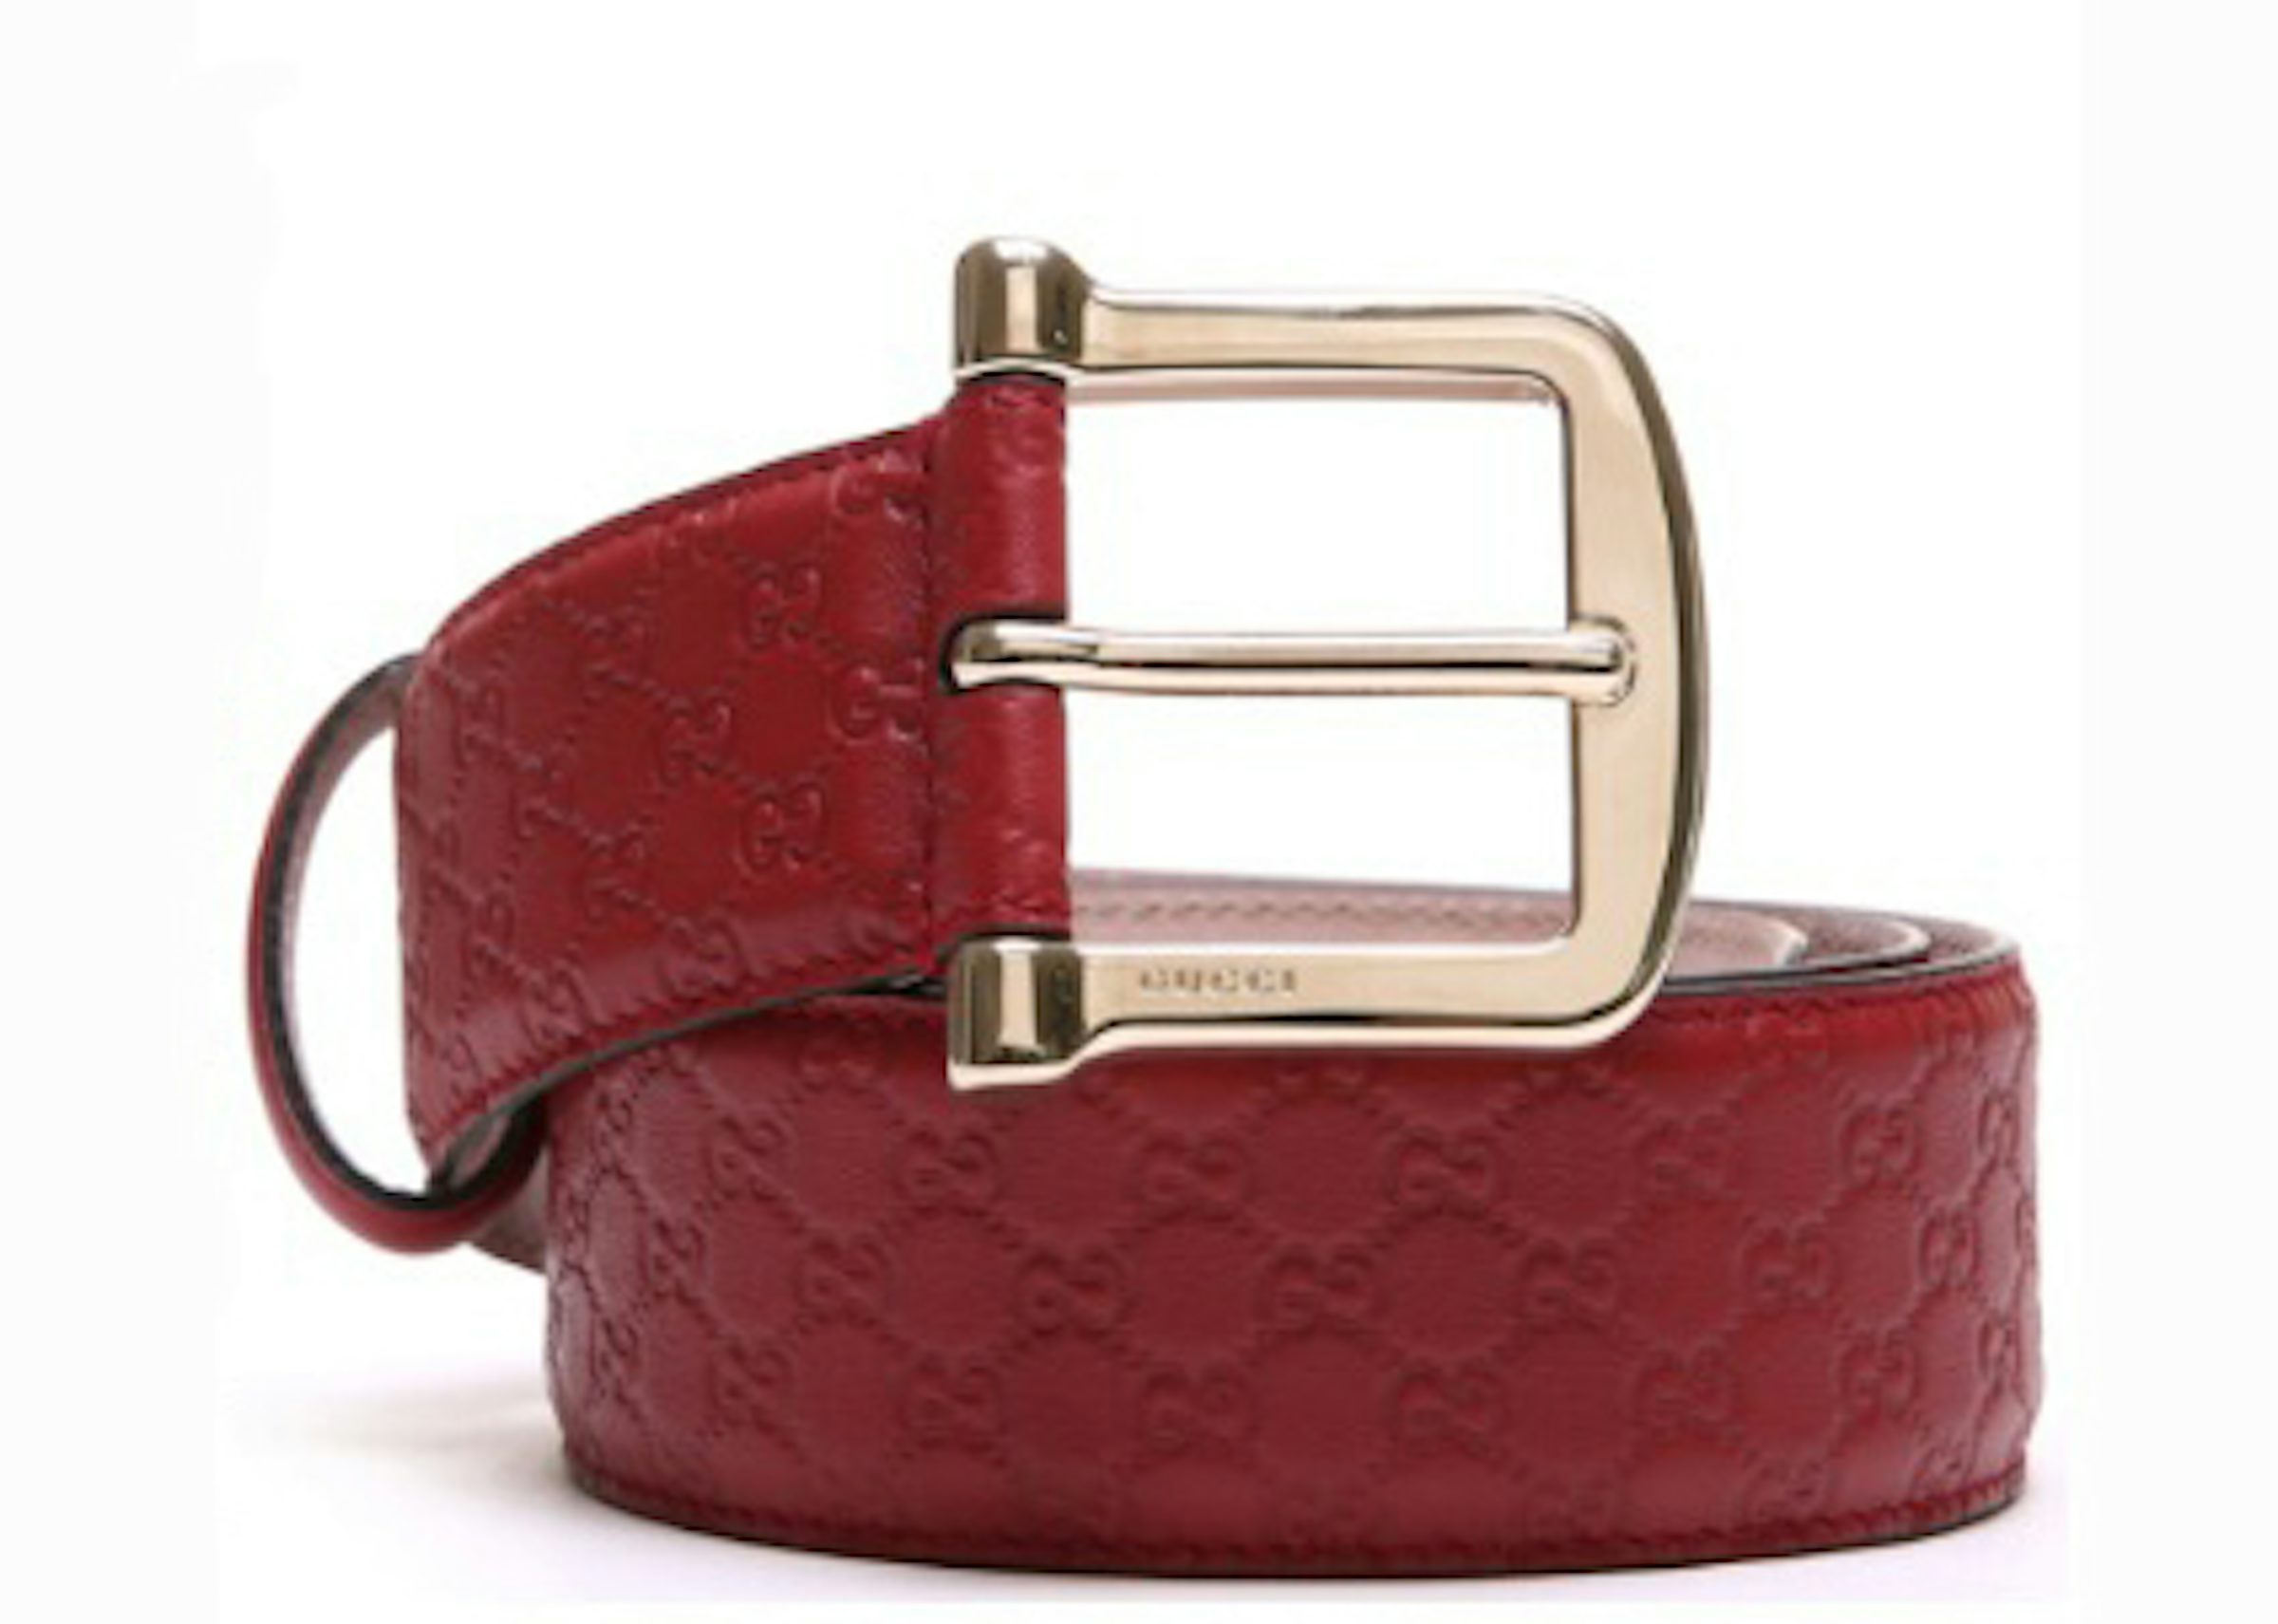 MCM Claus Enamel M Reversible Belt 1.2W Ruby Red/Black in Leather with  Gold-tone - US